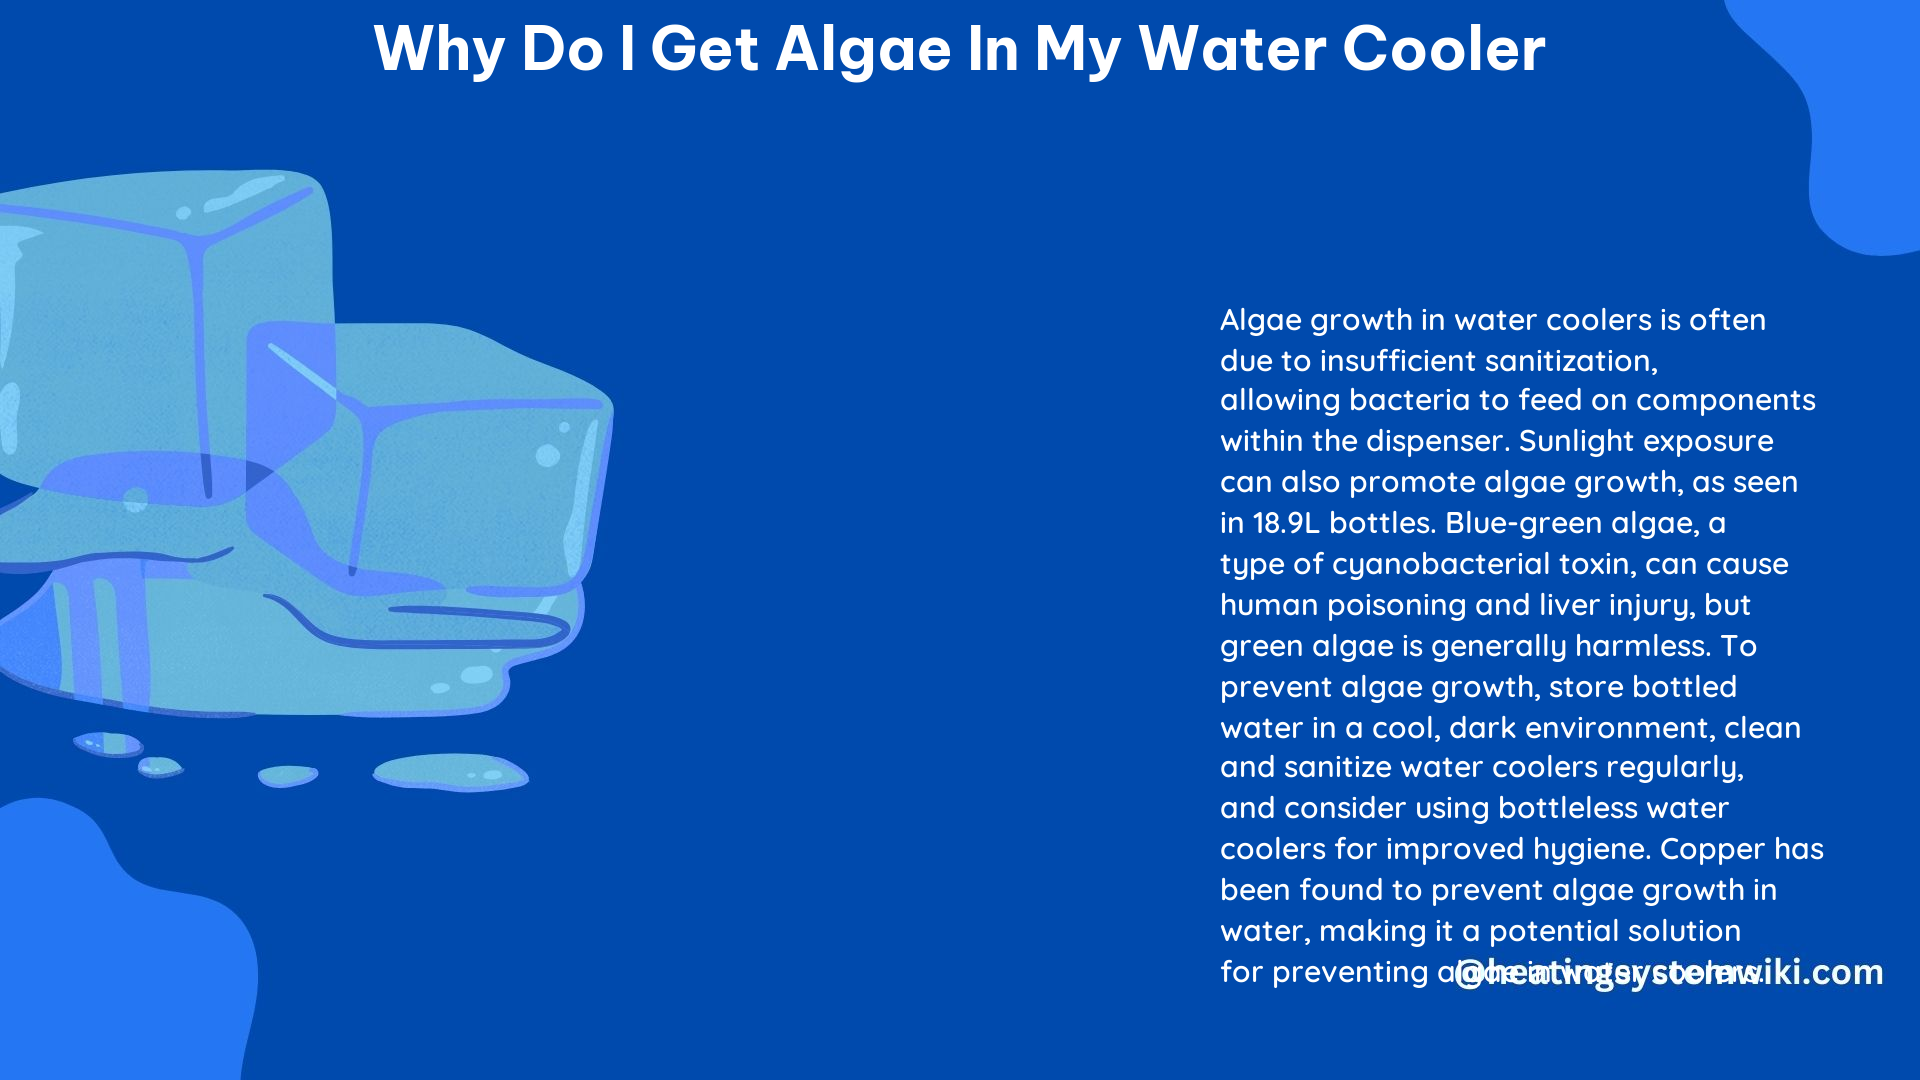 Why Do I Get Algae in My Water Cooler